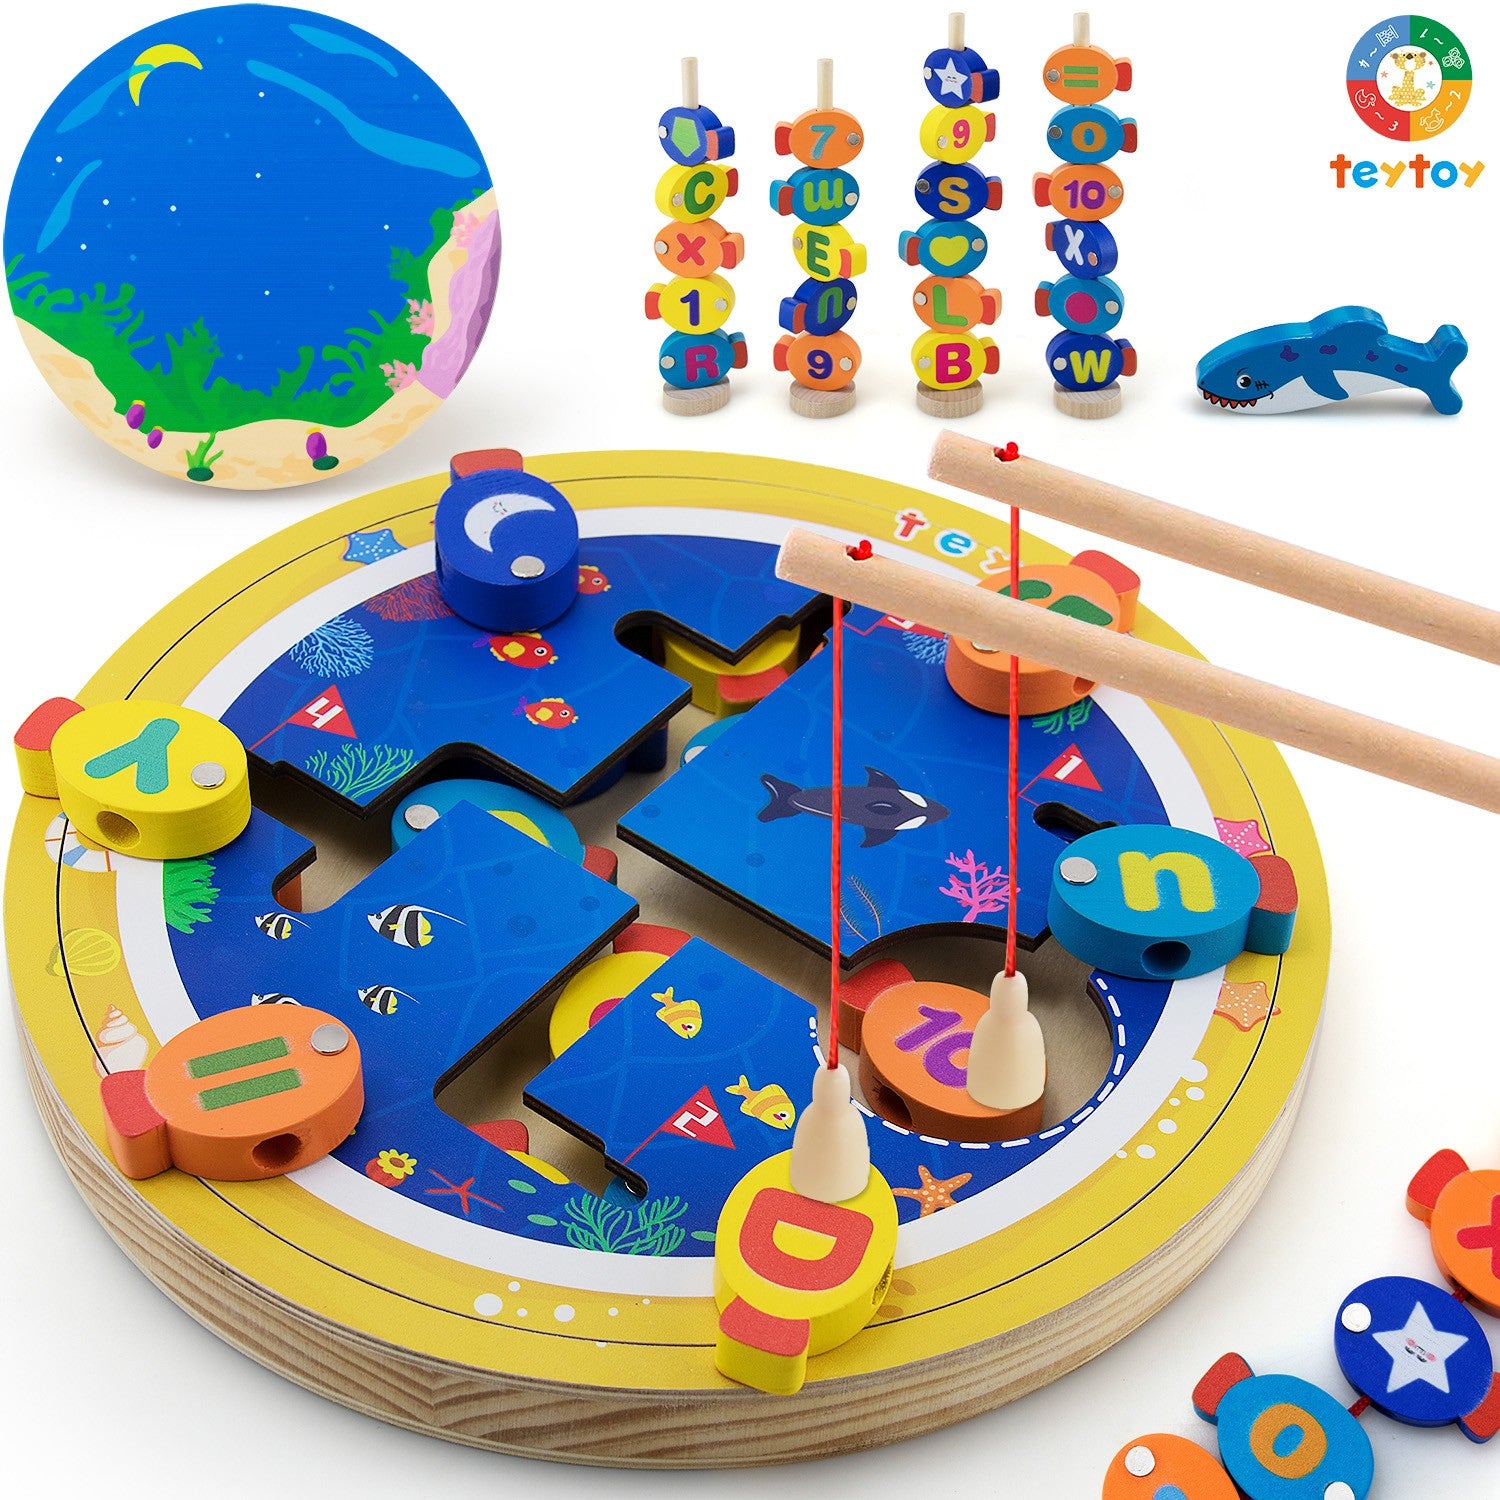 Ffycin Toddler Fishing Game For 2 Year Old, Kids Fishing Games For 2 Year Olds, Toddler Birthday Gift For Two Year Old Boy Girl